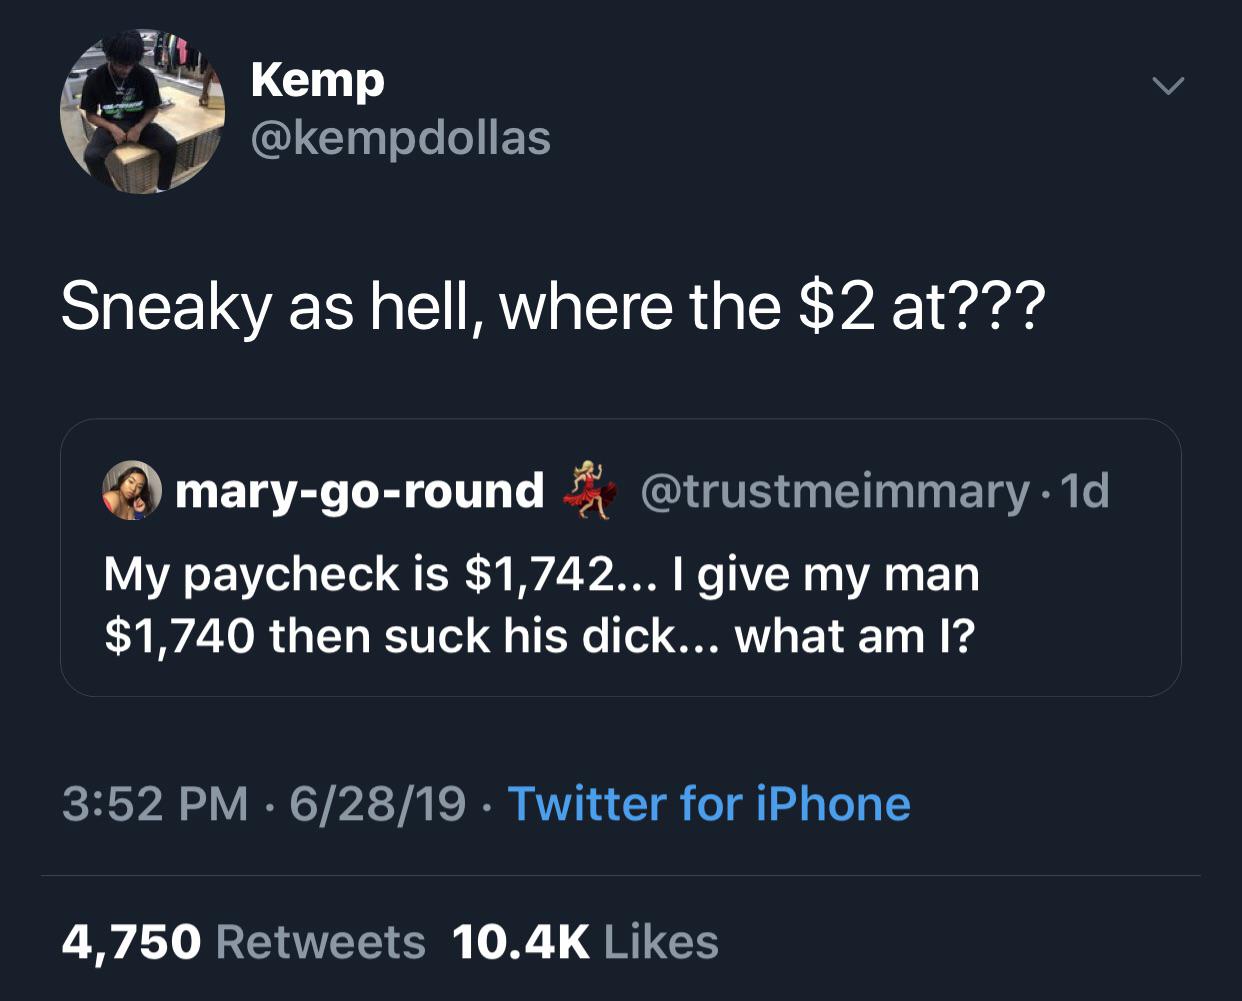 black twitter - Kemp Kemp Sneaky as hell, where the $2 at??? marygoround . 1d My paycheck is $1,742... I give my man $1,740 then suck his dick... what am I?